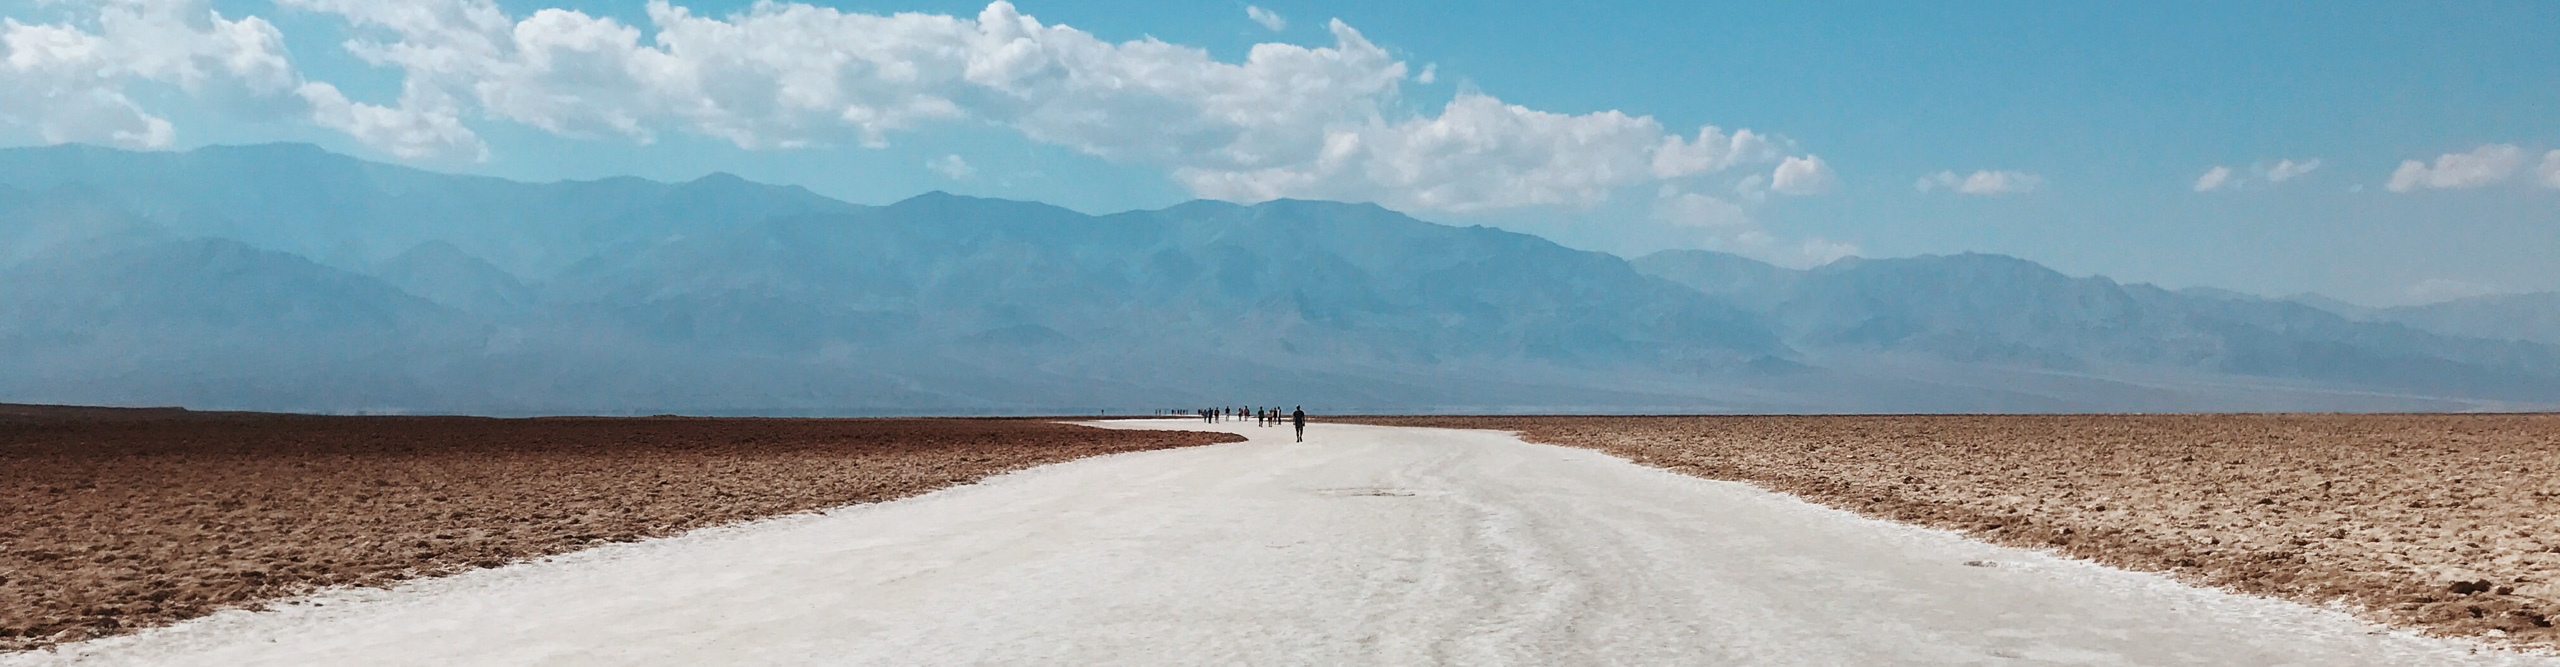 Travellers walking on Road through Death Valley on a clear sunny day California, USA